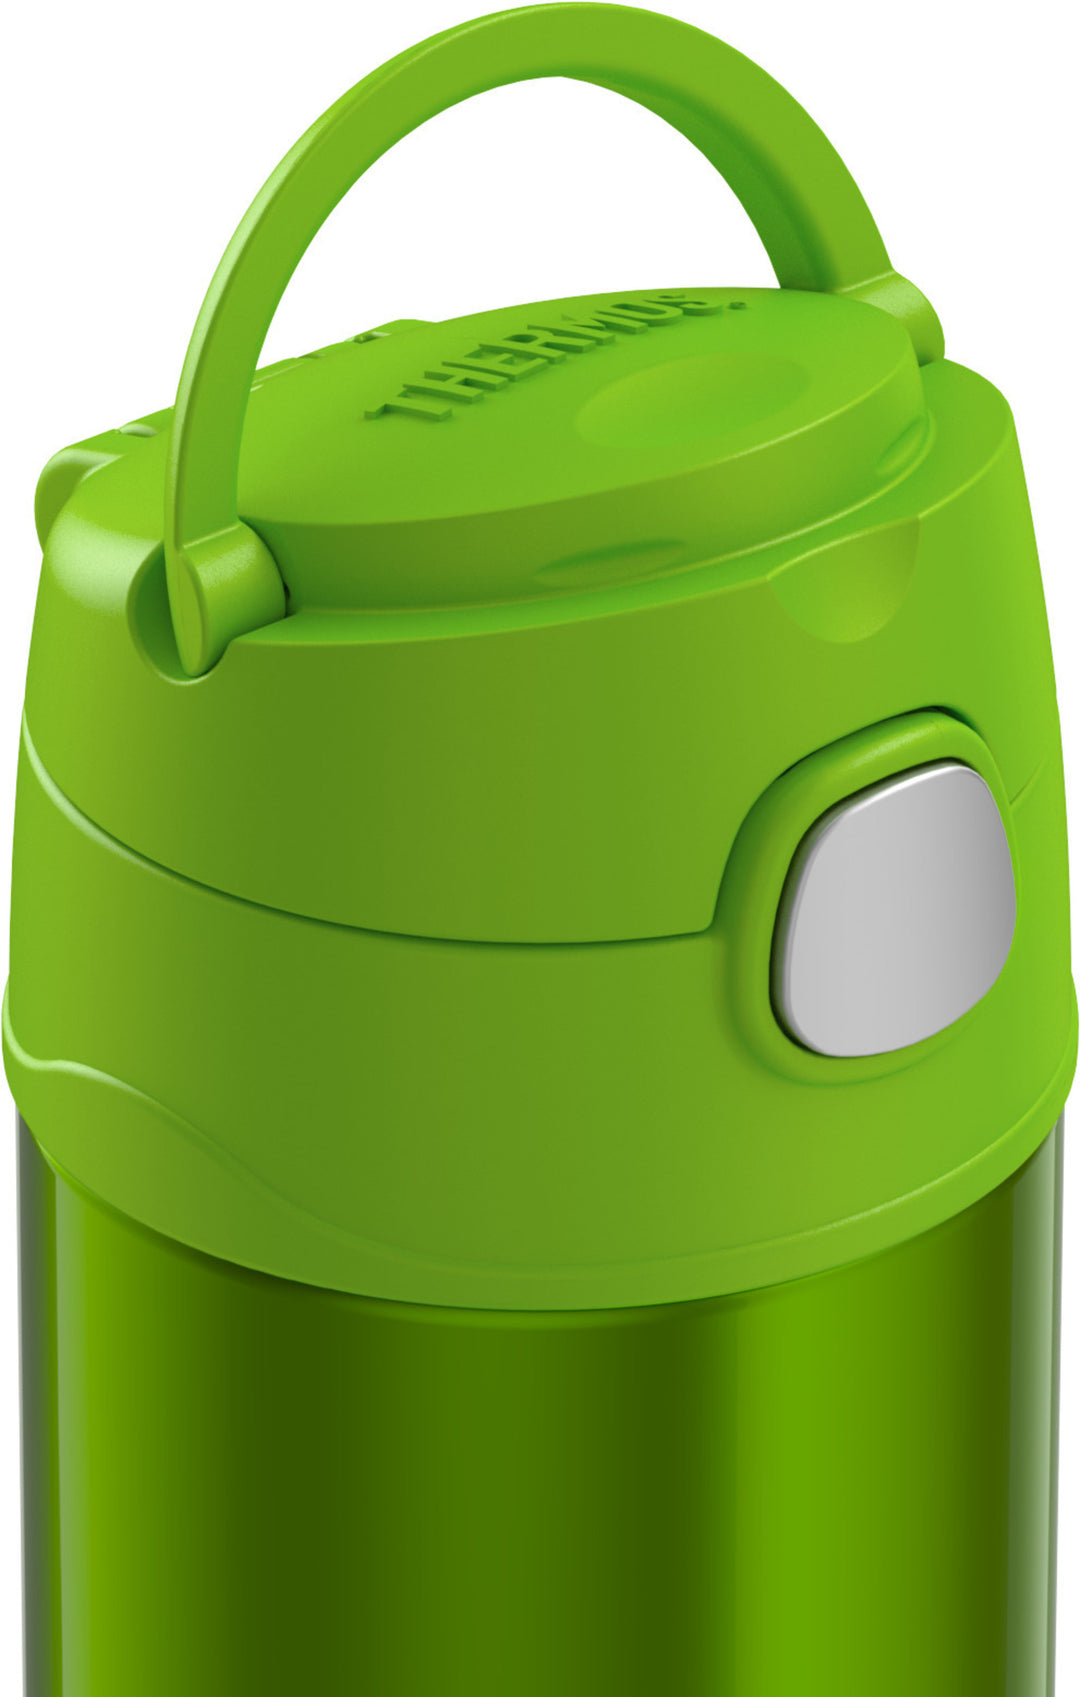 Thermos Funtainer Insulated Drink Bottle - Lime Green